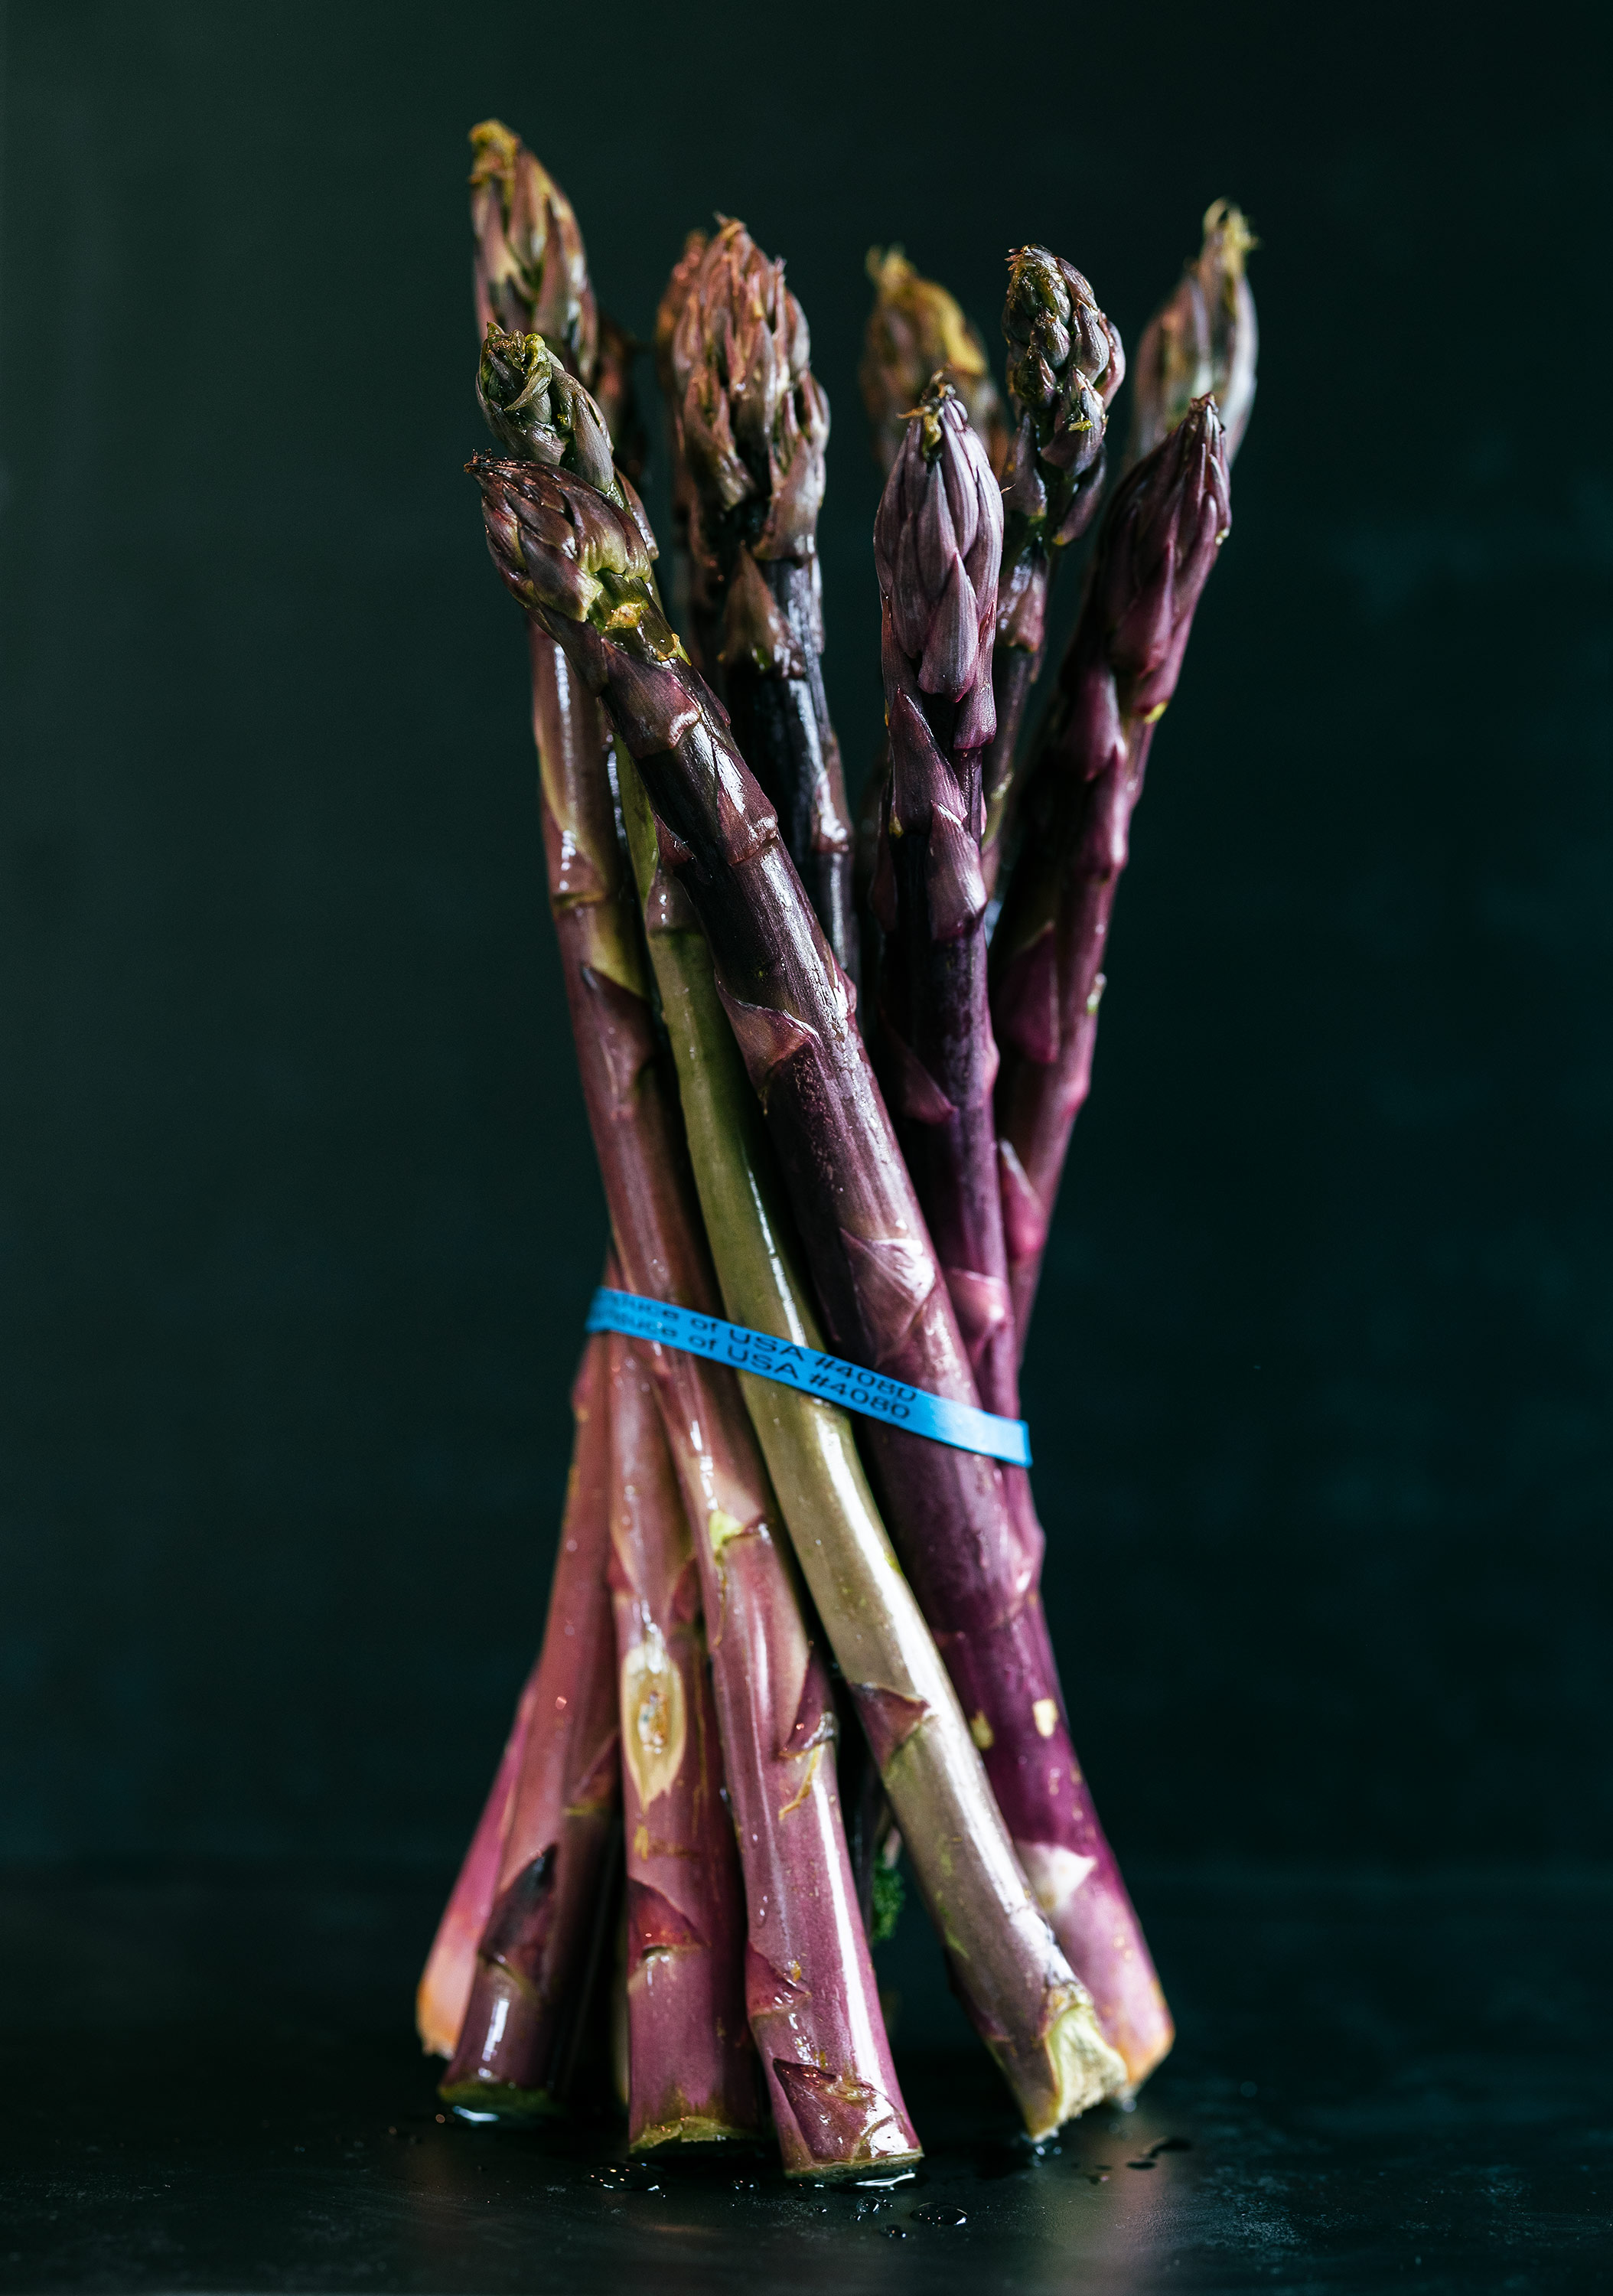 Glanger Photography | Purple asparagus tied with a blue rubber band shot dramatically against a black background